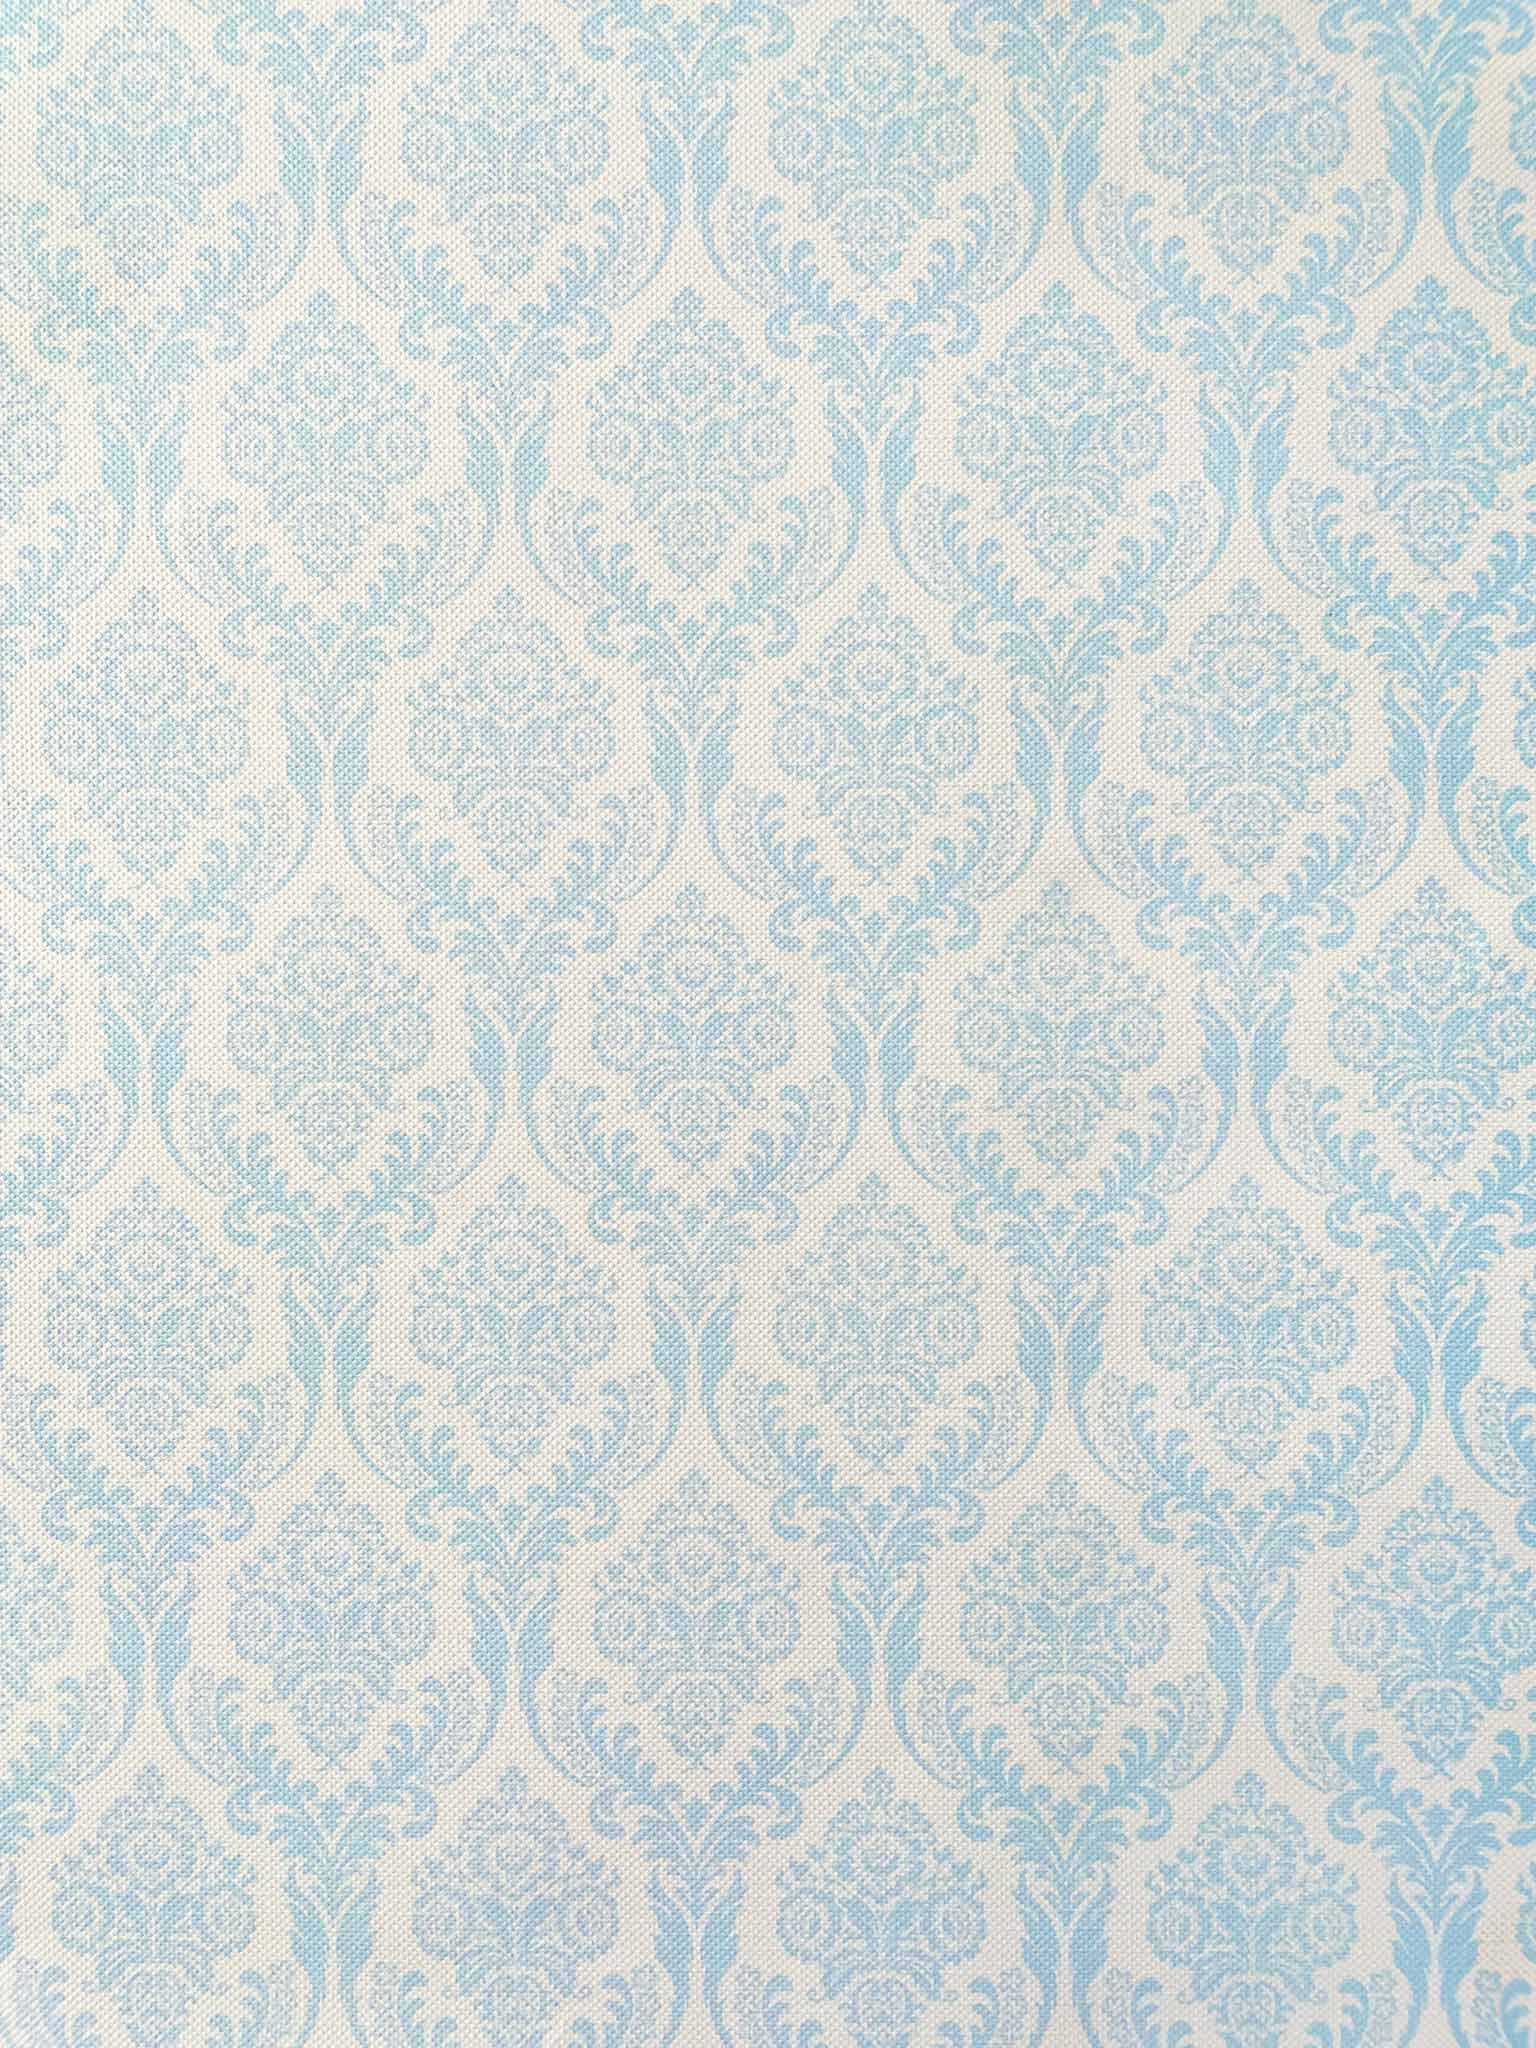 pale-blue-and-white-vintage-damask-pattern-paper